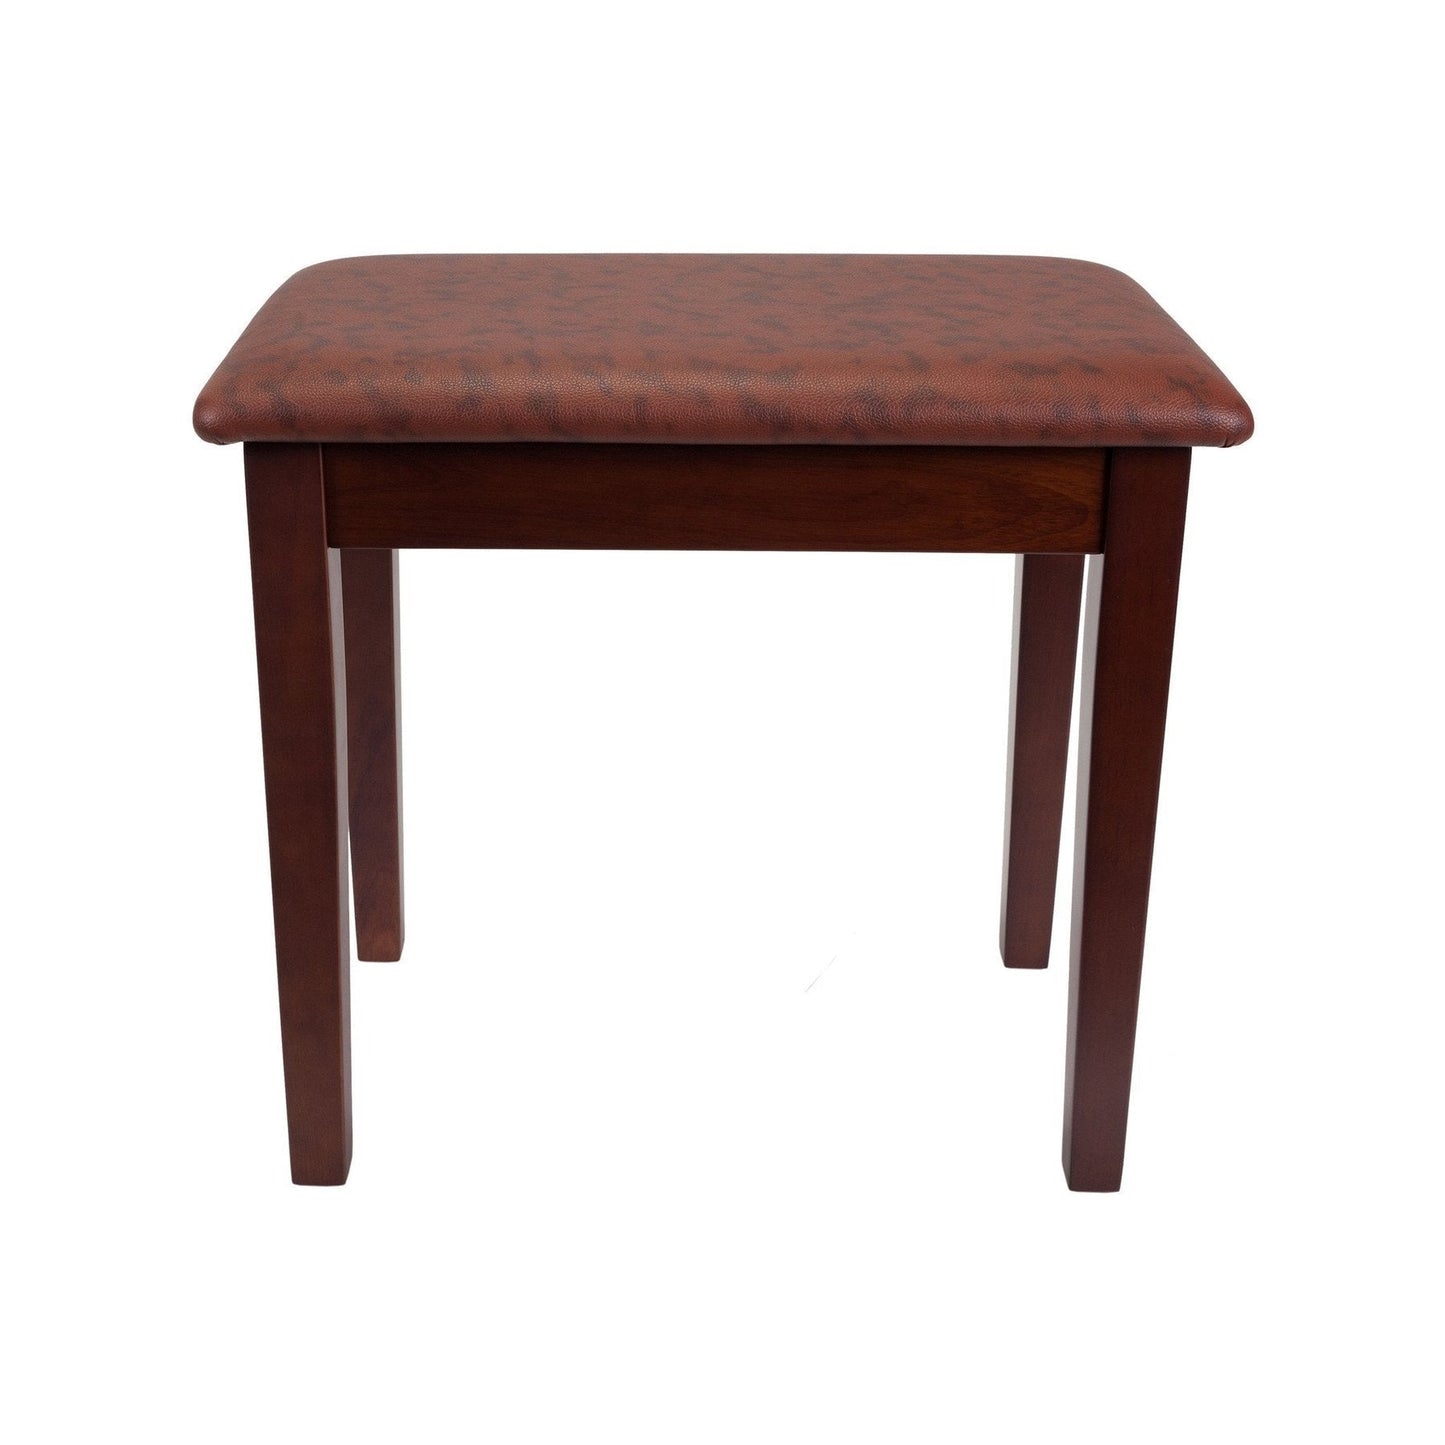 Crown Compact Piano Stool with Storage Compartment (Walnut)